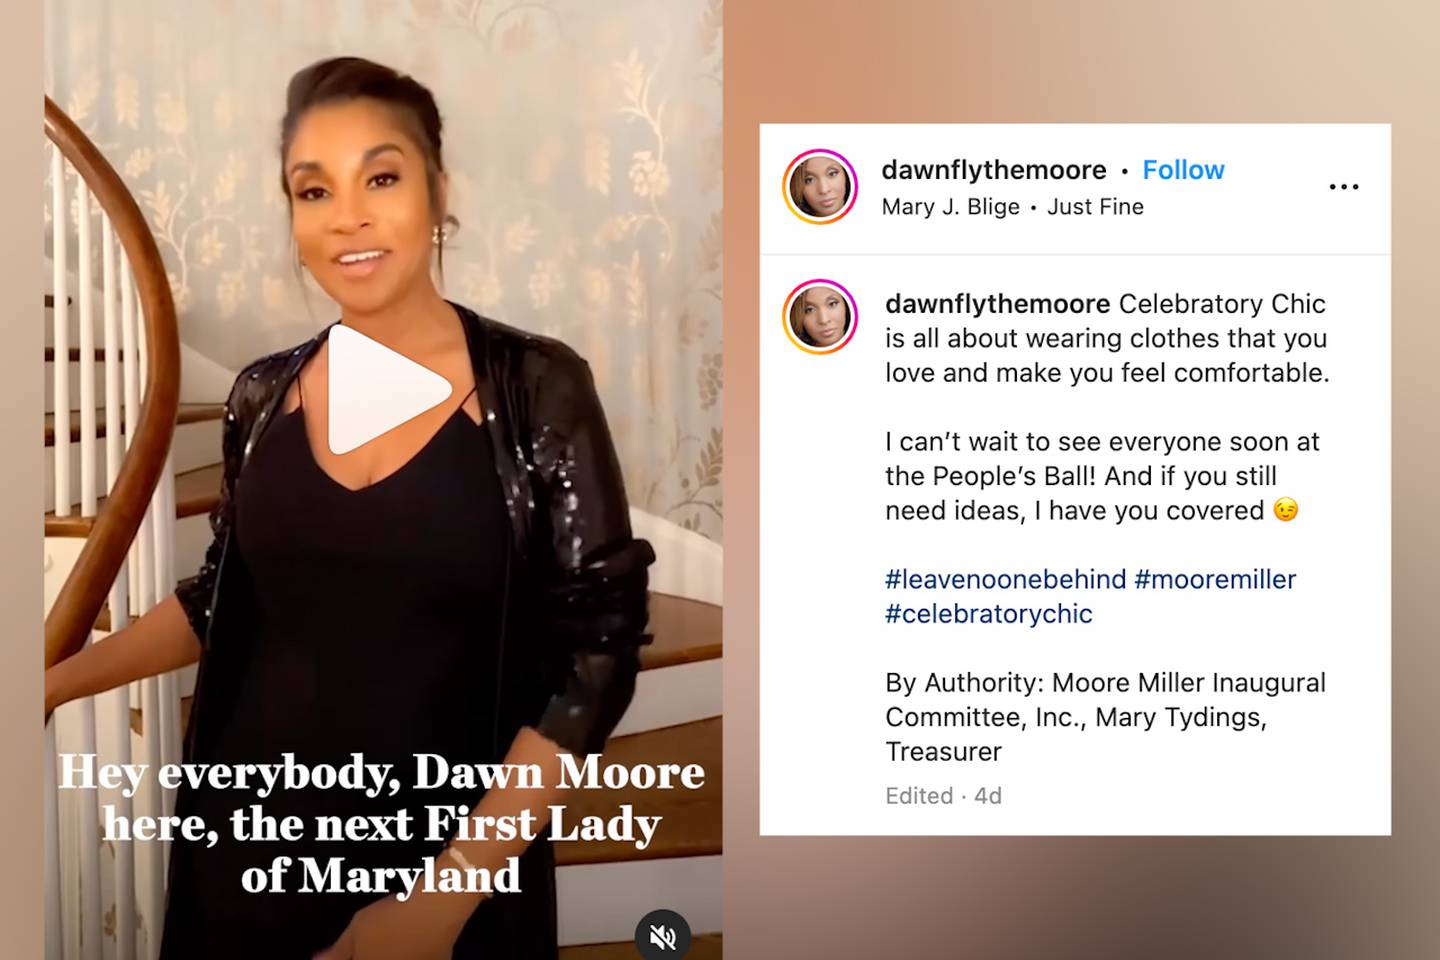 A screenshot from future First Lady of Maryland Dawn Moore's instagram account on a video where she describes what "celebration chic" is for the upcoming Inauguration Ball.